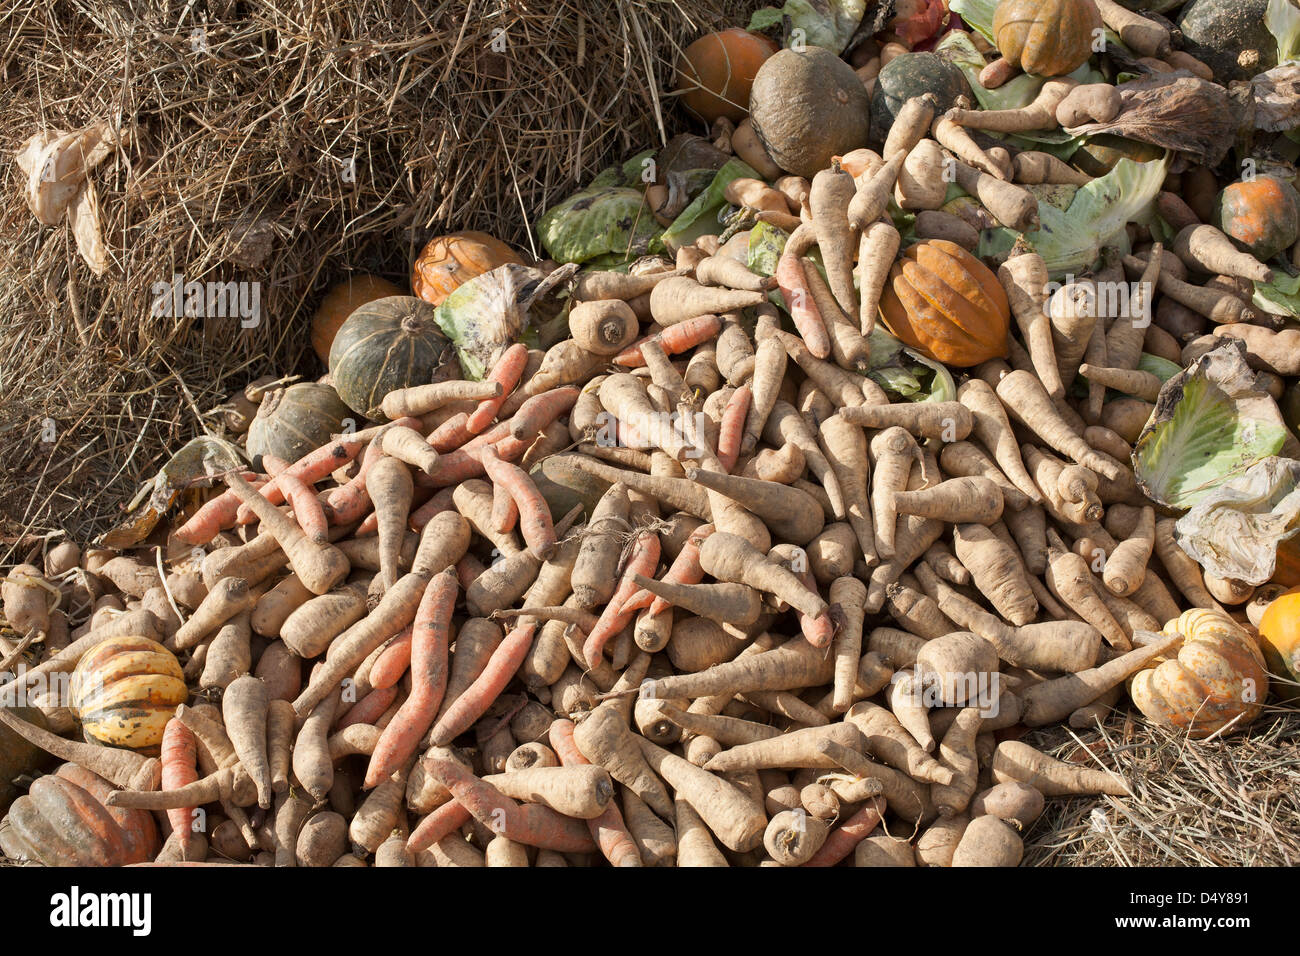 Community Supported Agriculture (CSA) farm has discarded damaged vegetables into a compost pile. Stock Photo